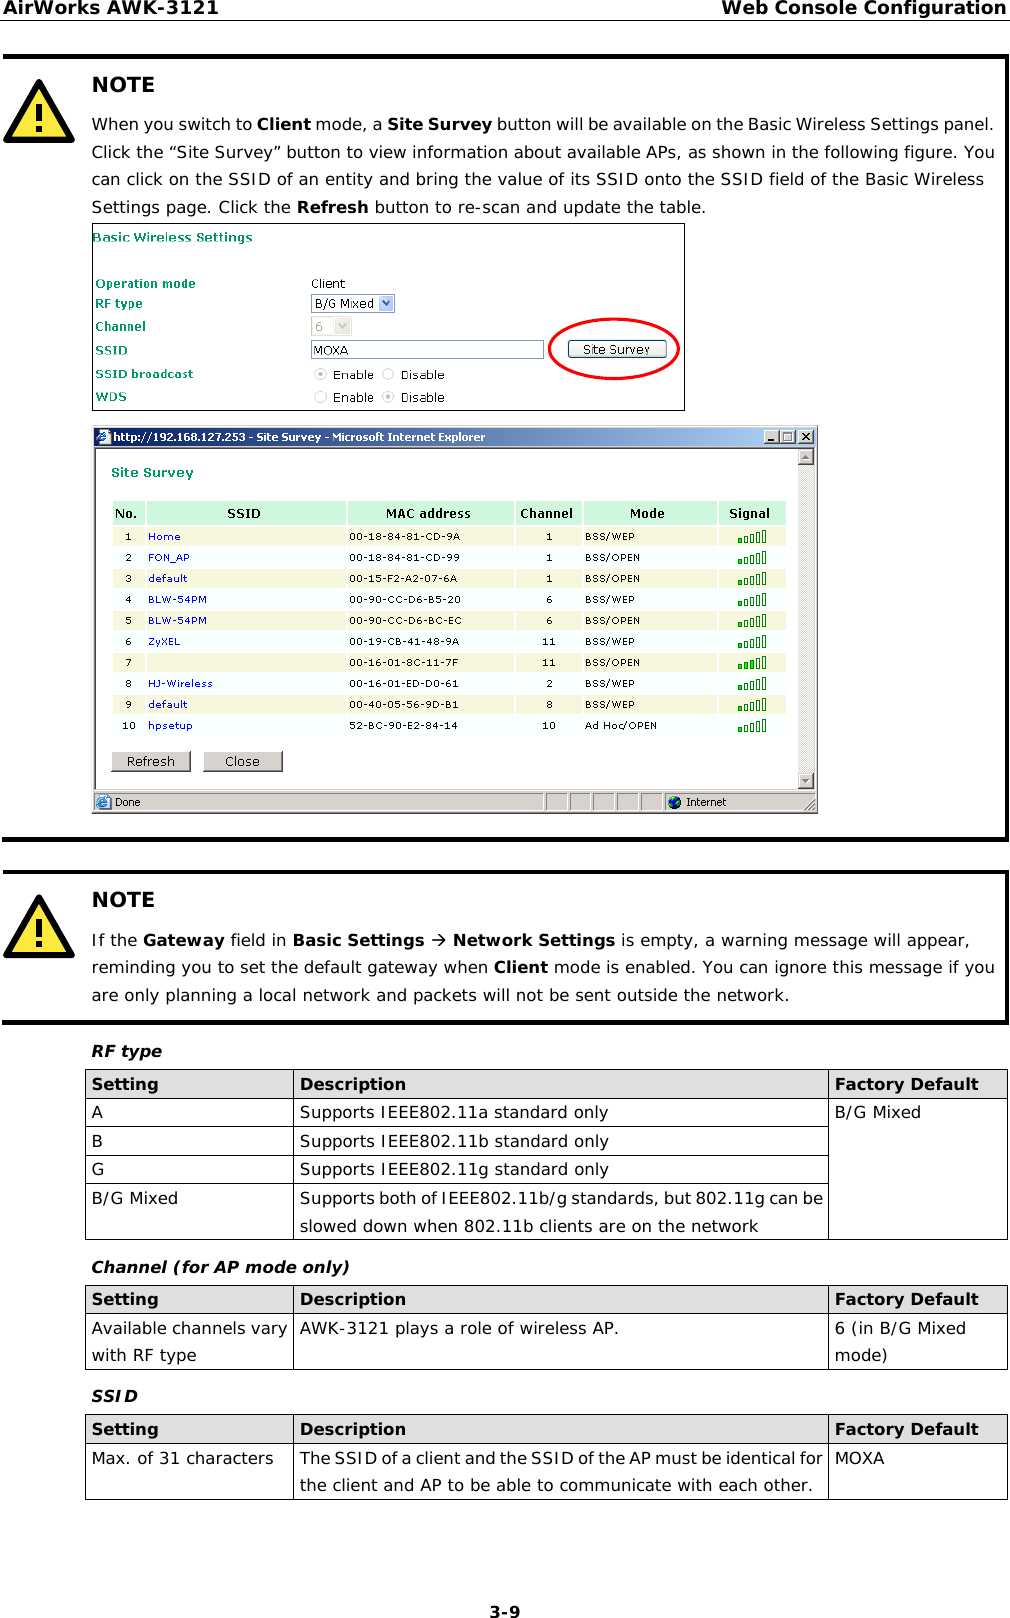 AirWorks AWK-3121  Web Console Configuration  3-9 NOTE When you switch to Client mode, a Site Survey button will be available on the Basic Wireless Settings panel. Click the “Site Survey” button to view information about available APs, as shown in the following figure. You can click on the SSID of an entity and bring the value of its SSID onto the SSID field of the Basic Wireless Settings page. Click the Refresh button to re-scan and update the table.      NOTE If the Gateway field in Basic Settings Æ Network Settings is empty, a warning message will appear, reminding you to set the default gateway when Client mode is enabled. You can ignore this message if you are only planning a local network and packets will not be sent outside the network.  RF type Setting  Description  Factory Default A  Supports IEEE802.11a standard only  B/G Mixed  B  Supports IEEE802.11b standard only G  Supports IEEE802.11g standard only B/G Mixed  Supports both of IEEE802.11b/g standards, but 802.11g can be slowed down when 802.11b clients are on the network Channel (for AP mode only) Setting  Description  Factory Default Available channels vary with RF type  AWK-3121 plays a role of wireless AP.  6 (in B/G Mixed mode) SSID Setting  Description  Factory Default Max. of 31 characters  The SSID of a client and the SSID of the AP must be identical for the client and AP to be able to communicate with each other.  MOXA 